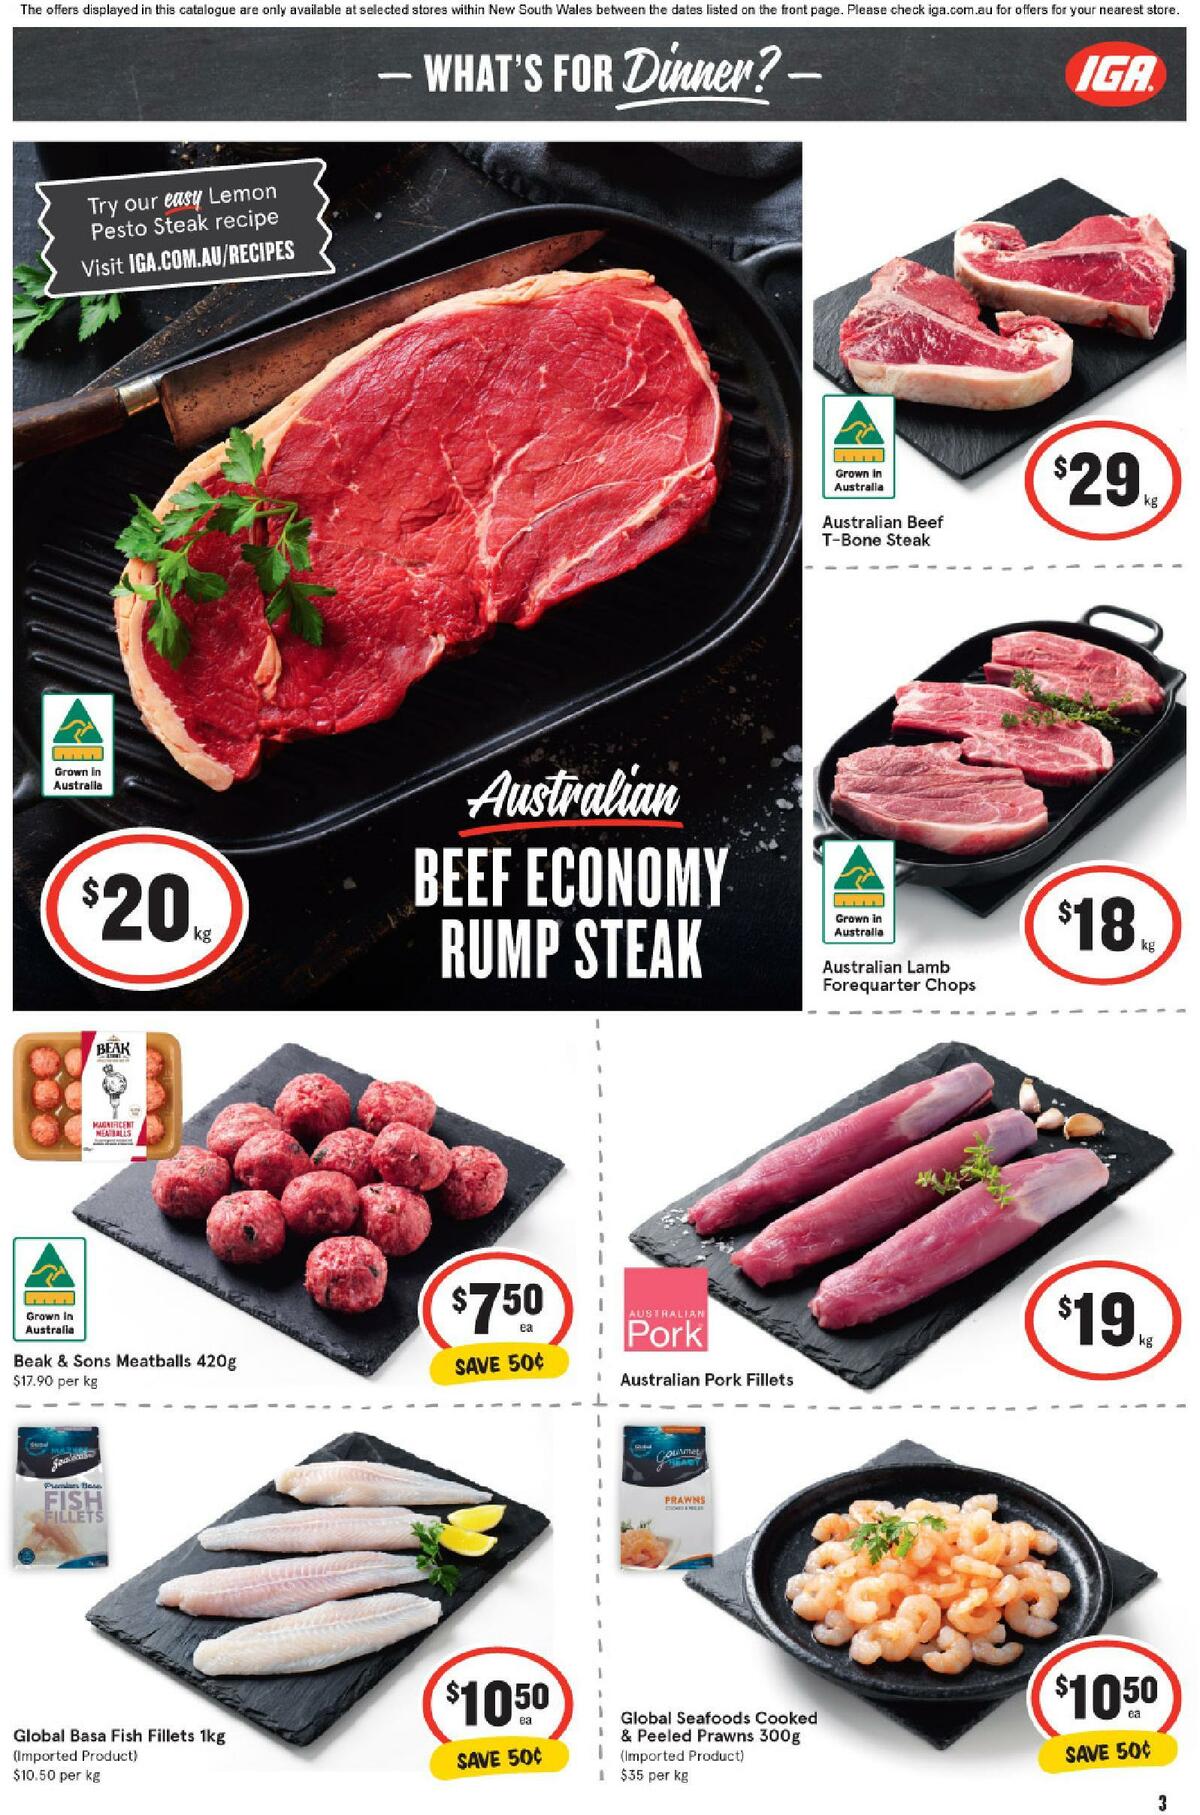 IGA Catalogues from 13 July